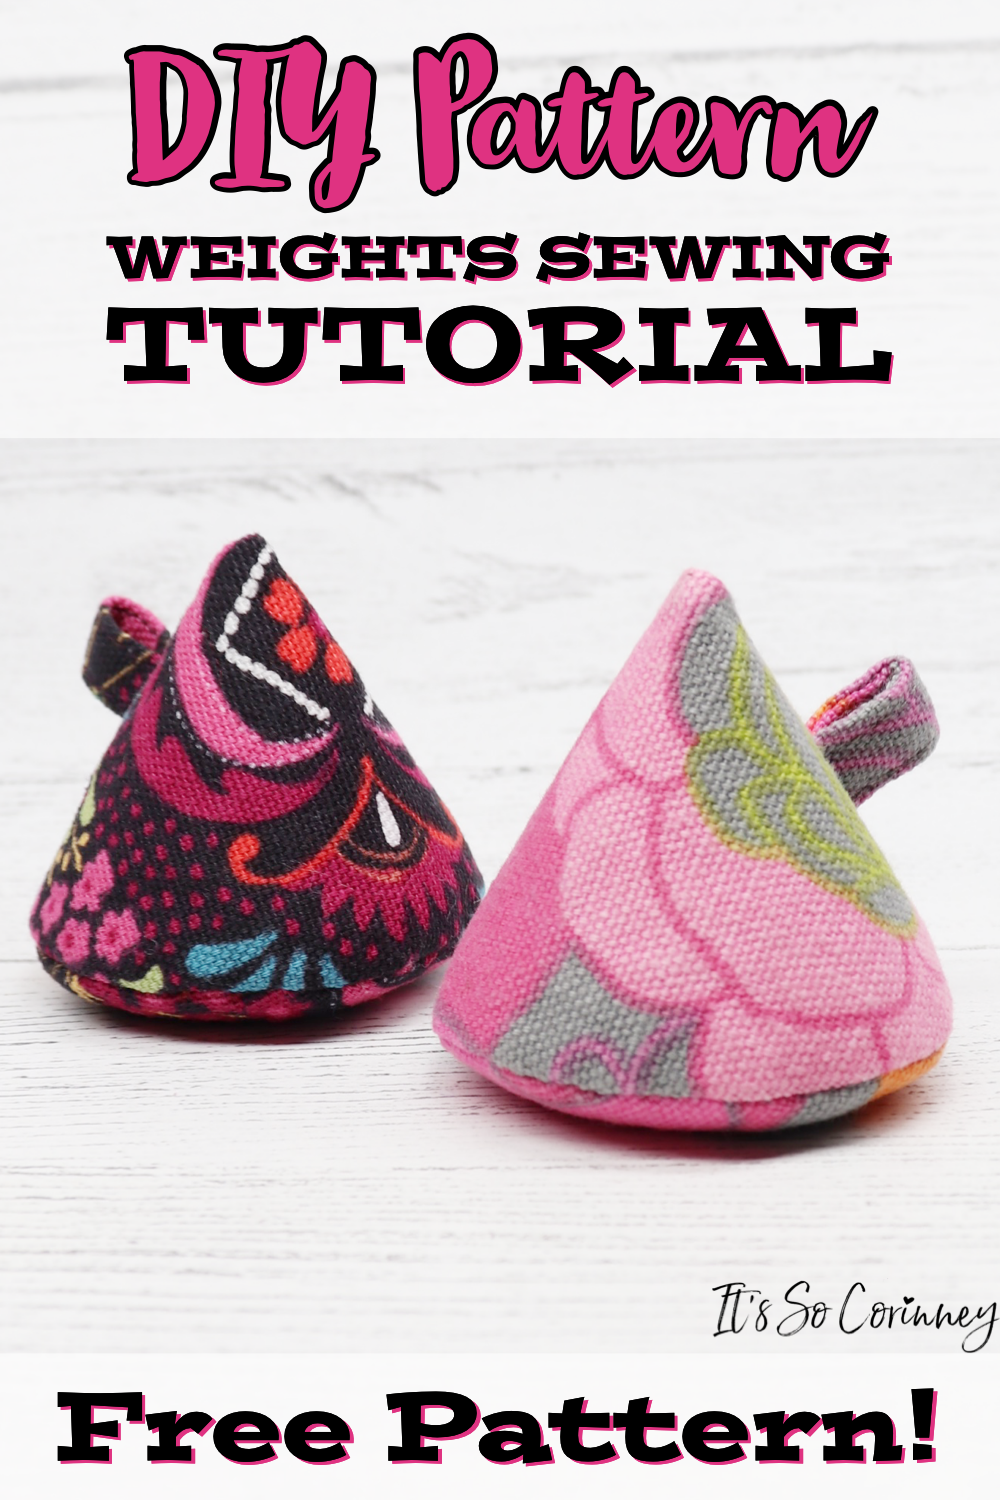 DIY Pattern Weights Sewing Tutorial - It's So Corinney